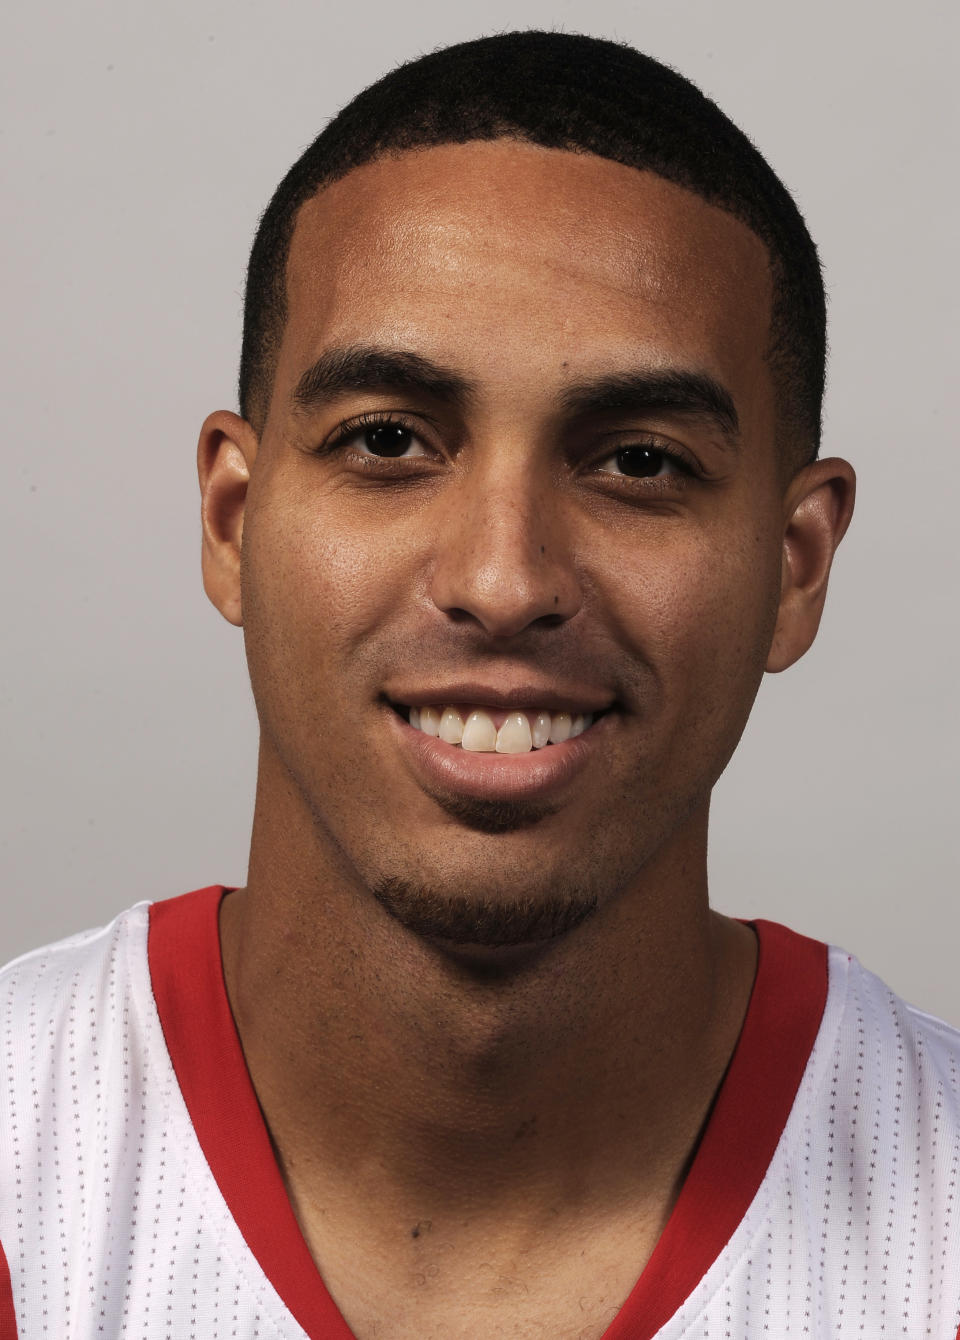 In this Oct. 1, 2012, photo, Houston Rockets' Kevin Martin poses during the NBA basketball team's media day in Houston. The Oklahoma City Thunder have traded Sixth Man of the Year James Harden to the Rockets, breaking up the young core of the Western Conference champions. The Thunder acquired guards Kevin Martin and Jeremy Lamb, two first-round picks and a second-round pick in the surprising deal that was completed Saturday night, Oct. 27, 2012. Oklahoma City also sent center Cole Aldrich, and forwards Daequan Cook and Lazar Hayward to Houston. (AP Photo/Pat Sullivan,File)